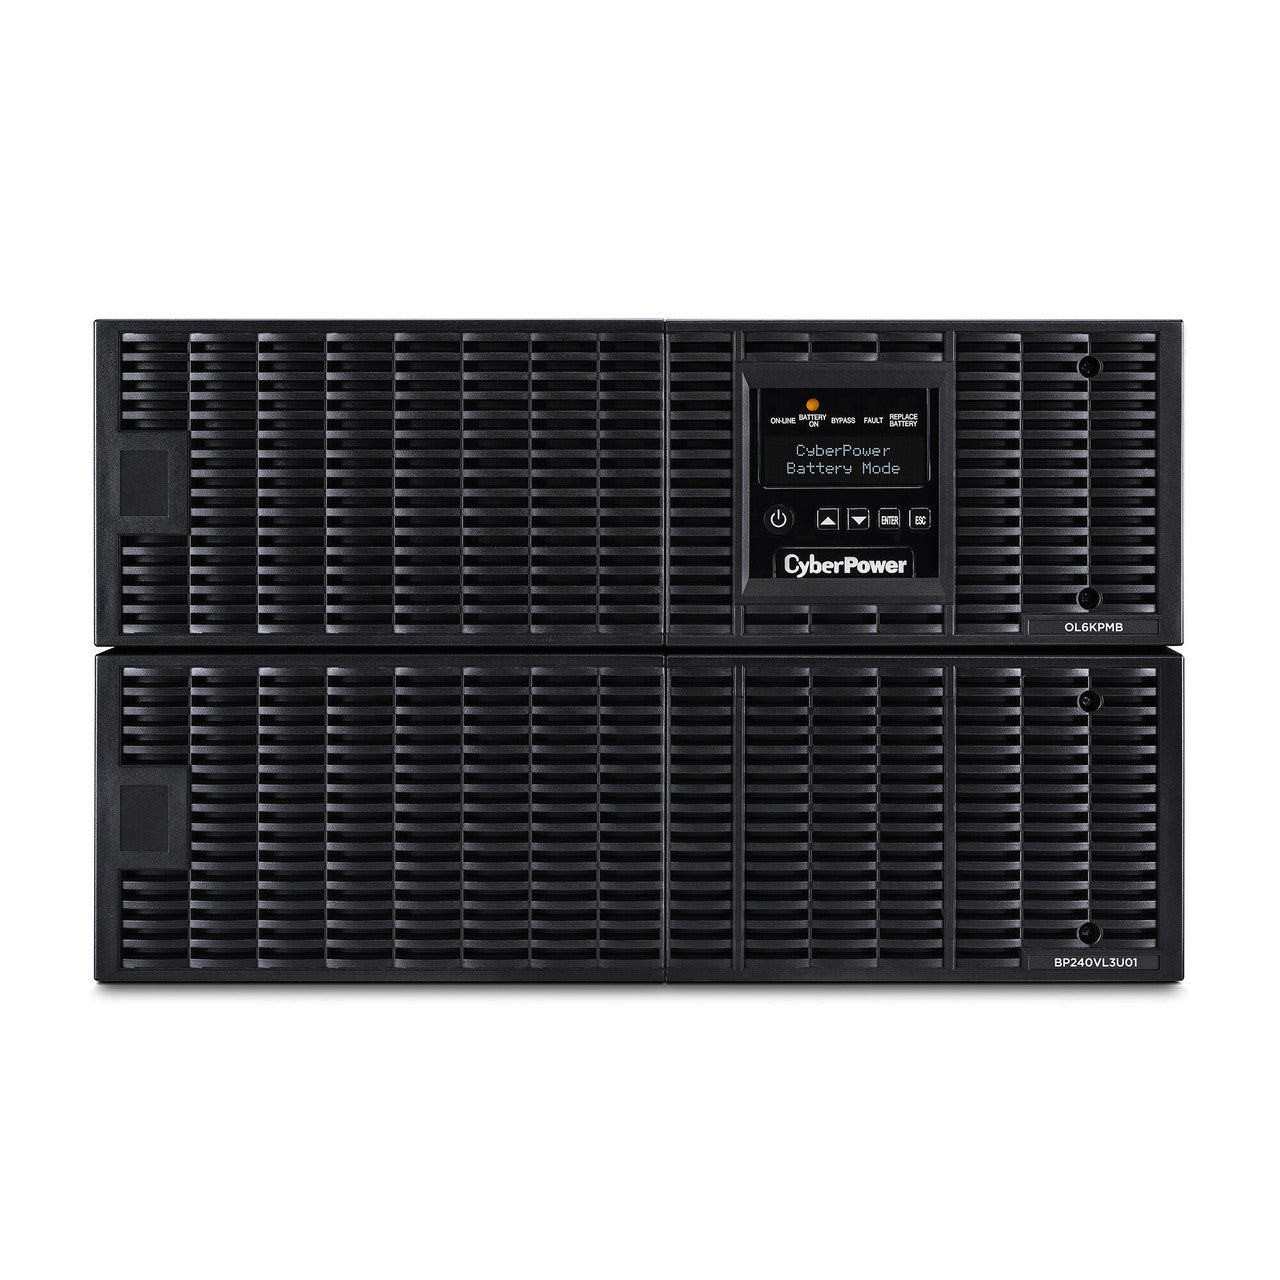 CyberPower OL6KRTHW 6KVA/6KW, online double-conversion UPS, PF=1, 6U rack/tower convertible